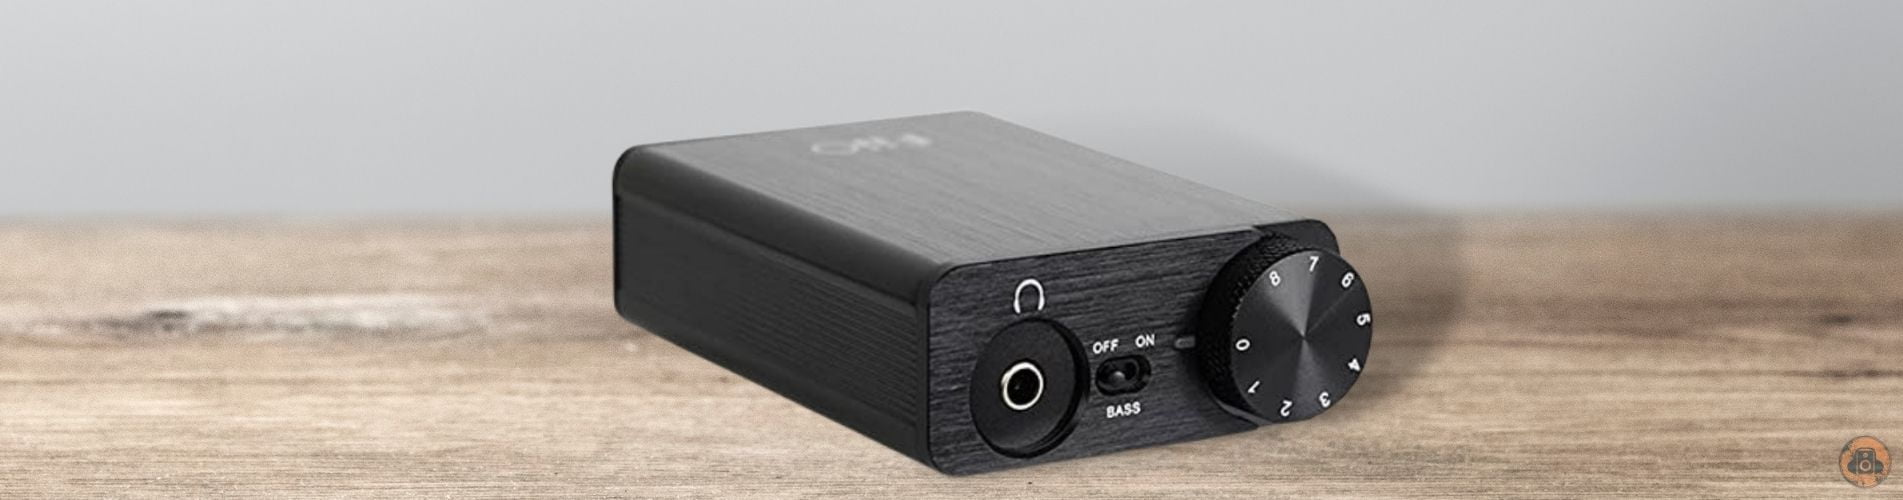 FiiO E10K Review - Speakers Reviewed Cover Image